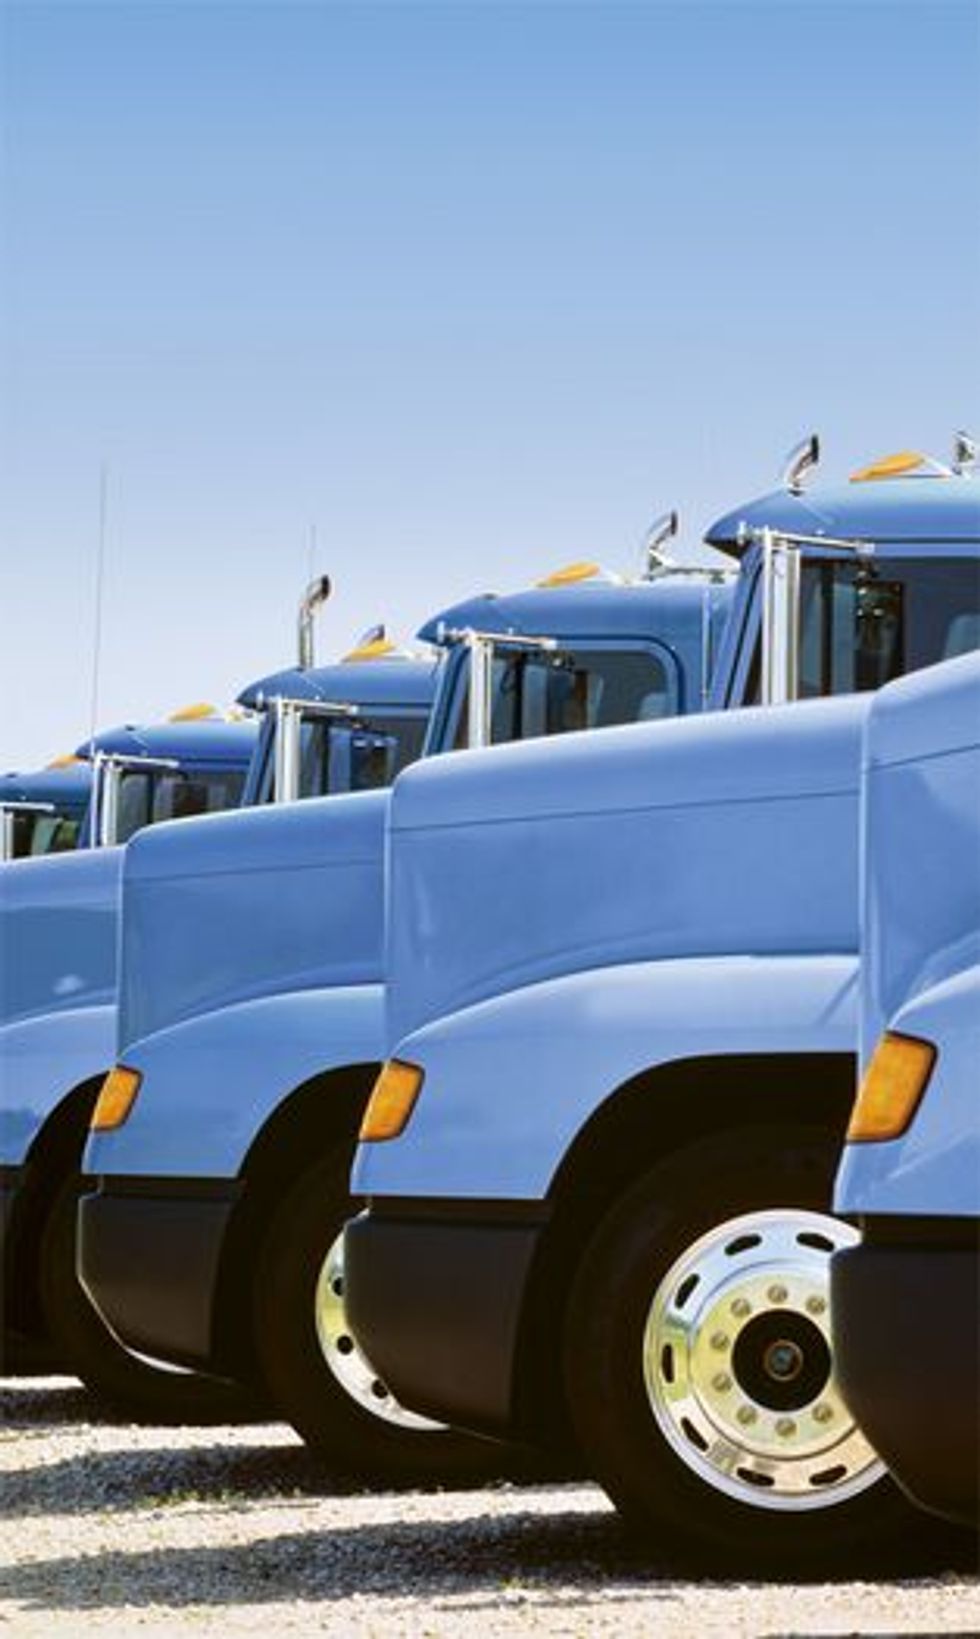 
NPTC Survey: Private Fleets Focus on Customer Service, Outbound Freight
